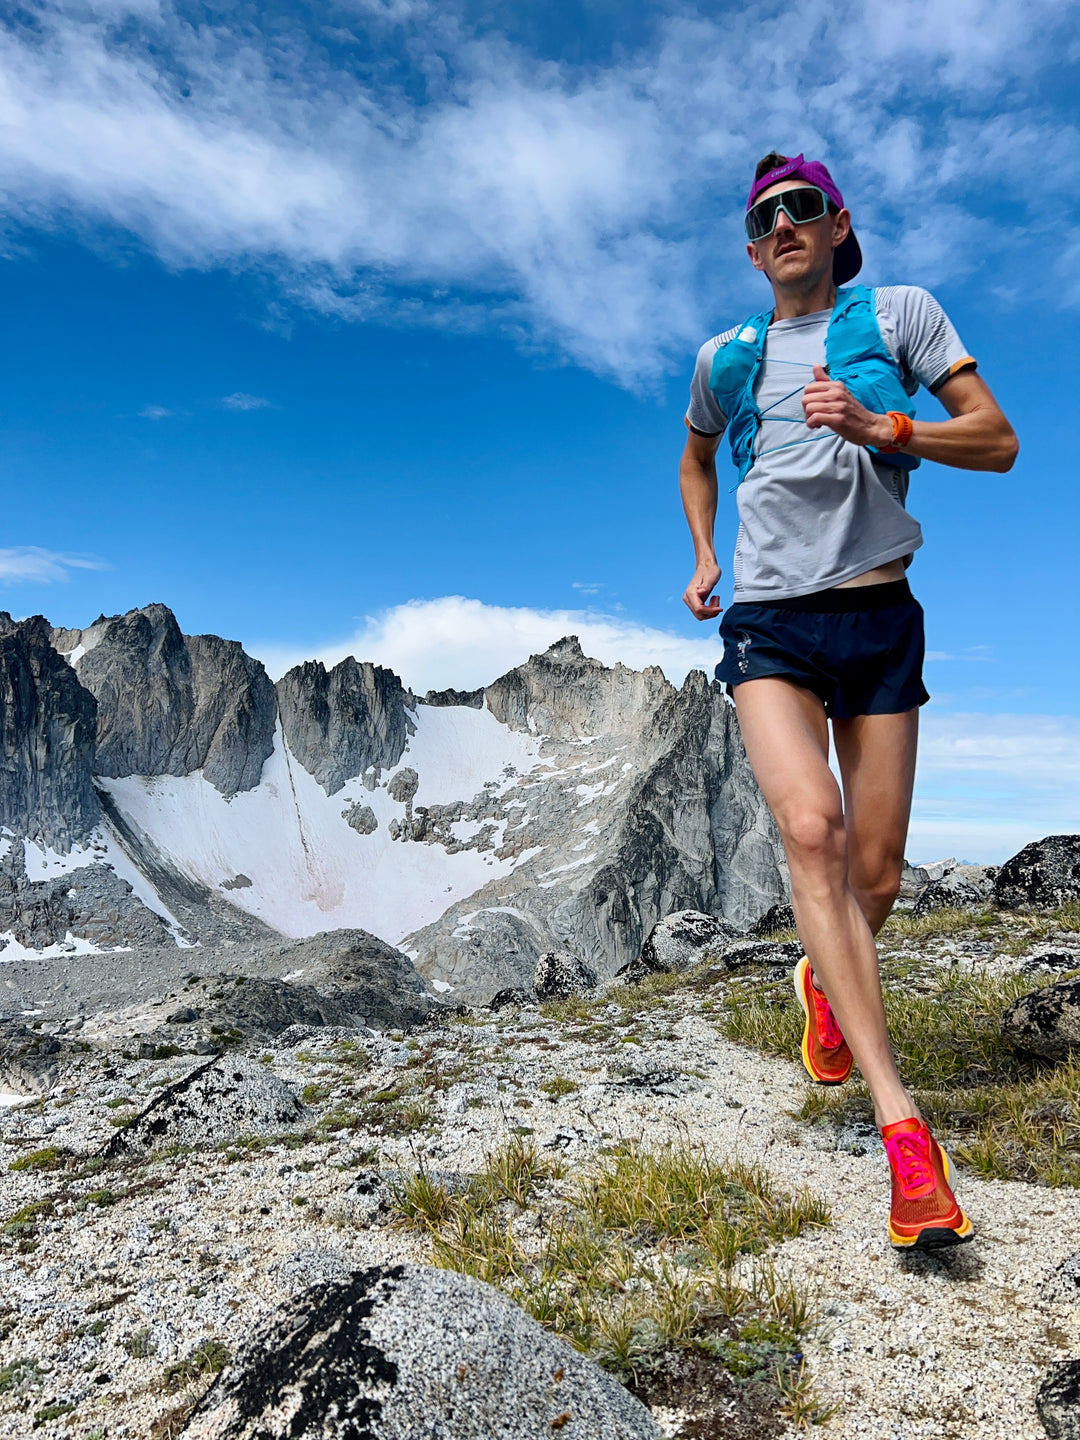 4 Awesome Sauce Trail “Runs” in Chamonix | by David Laney